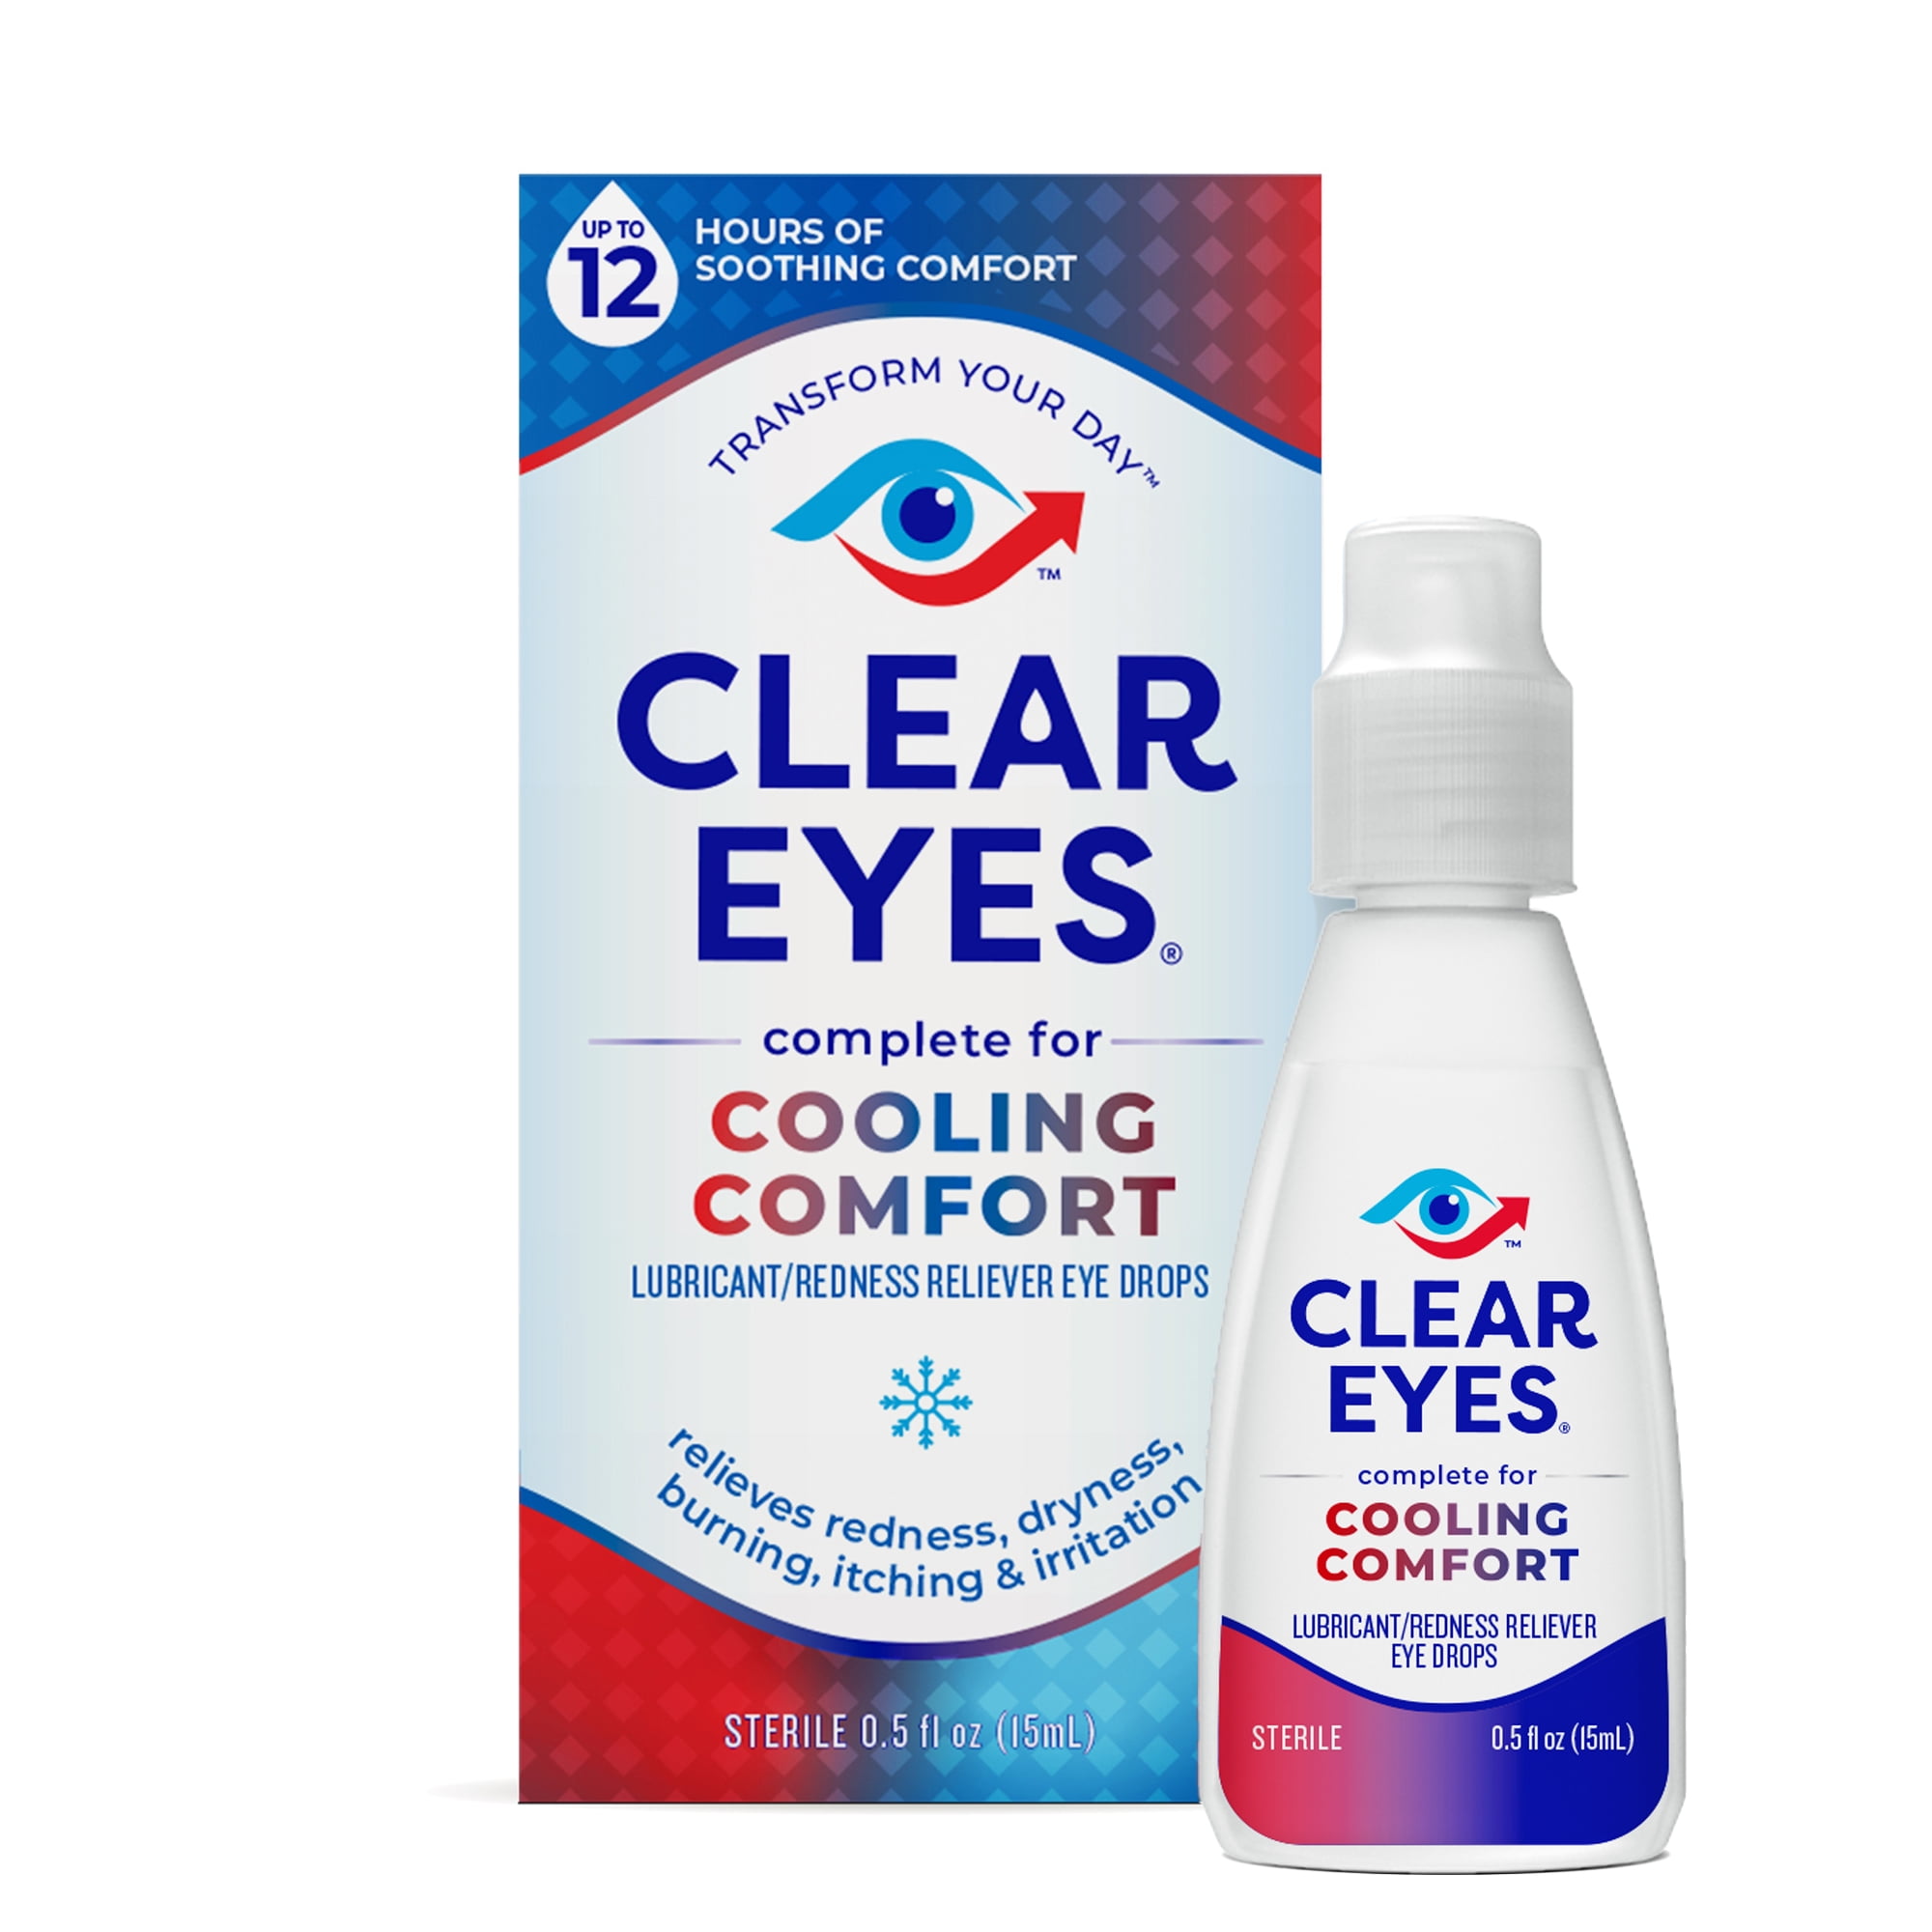 Clear Eyes Cooling Comfort Relief Lubricant Eye Drops, oz - Walmart.com